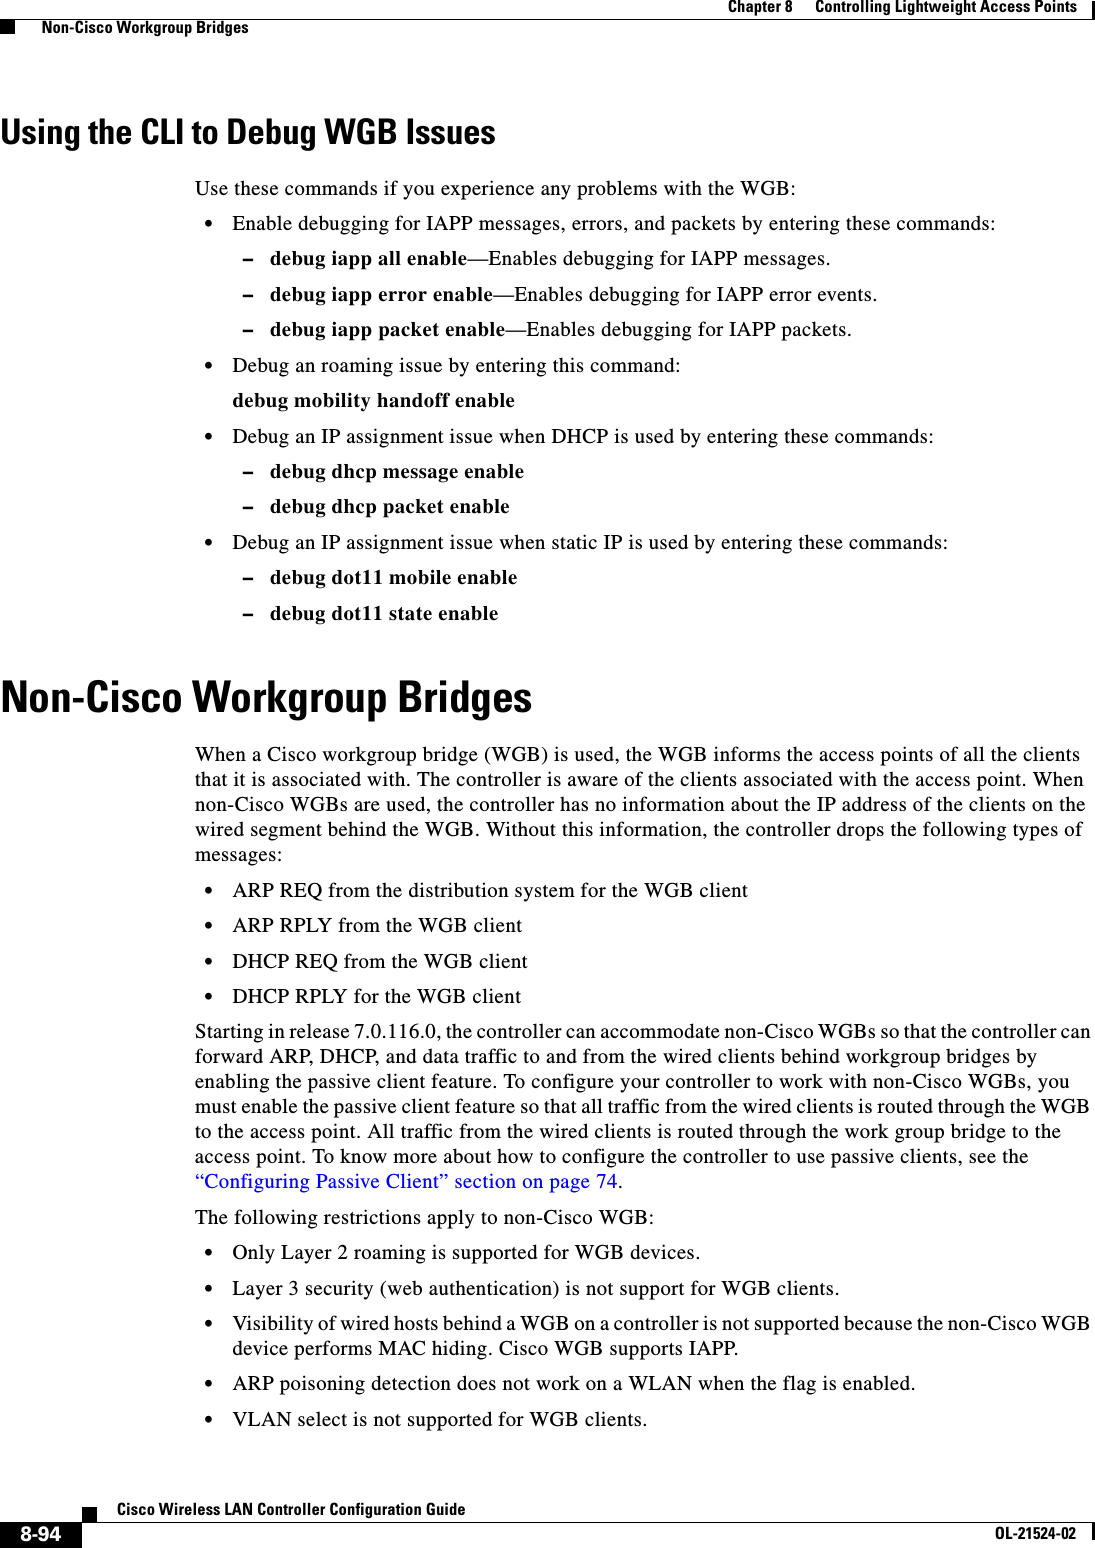  8-94Cisco Wireless LAN Controller Configuration GuideOL-21524-02Chapter 8      Controlling Lightweight Access Points  Non-Cisco Workgroup BridgesUsing the CLI to Debug WGB IssuesUse these commands if you experience any problems with the WGB:  • Enable debugging for IAPP messages, errors, and packets by entering these commands:  –debug iapp all enable—Enables debugging for IAPP messages.  –debug iapp error enable—Enables debugging for IAPP error events.  –debug iapp packet enable—Enables debugging for IAPP packets.  • Debug an roaming issue by entering this command:debug mobility handoff enable  • Debug an IP assignment issue when DHCP is used by entering these commands:  –debug dhcp message enable  –debug dhcp packet enable  • Debug an IP assignment issue when static IP is used by entering these commands:  –debug dot11 mobile enable  –debug dot11 state enableNon-Cisco Workgroup BridgesWhen a Cisco workgroup bridge (WGB) is used, the WGB informs the access points of all the clients that it is associated with. The controller is aware of the clients associated with the access point. When non-Cisco WGBs are used, the controller has no information about the IP address of the clients on the wired segment behind the WGB. Without this information, the controller drops the following types of messages:  • ARP REQ from the distribution system for the WGB client  • ARP RPLY from the WGB client   • DHCP REQ from the WGB client  • DHCP RPLY for the WGB clientStarting in release 7.0.116.0, the controller can accommodate non-Cisco WGBs so that the controller can forward ARP, DHCP, and data traffic to and from the wired clients behind workgroup bridges by enabling the passive client feature. To configure your controller to work with non-Cisco WGBs, you must enable the passive client feature so that all traffic from the wired clients is routed through the WGB to the access point. All traffic from the wired clients is routed through the work group bridge to the access point. To know more about how to configure the controller to use passive clients, see the “Configuring Passive Client” section on page 74.The following restrictions apply to non-Cisco WGB:  • Only Layer 2 roaming is supported for WGB devices.  • Layer 3 security (web authentication) is not support for WGB clients.  • Visibility of wired hosts behind a WGB on a controller is not supported because the non-Cisco WGB device performs MAC hiding. Cisco WGB supports IAPP.  • ARP poisoning detection does not work on a WLAN when the flag is enabled.  • VLAN select is not supported for WGB clients.